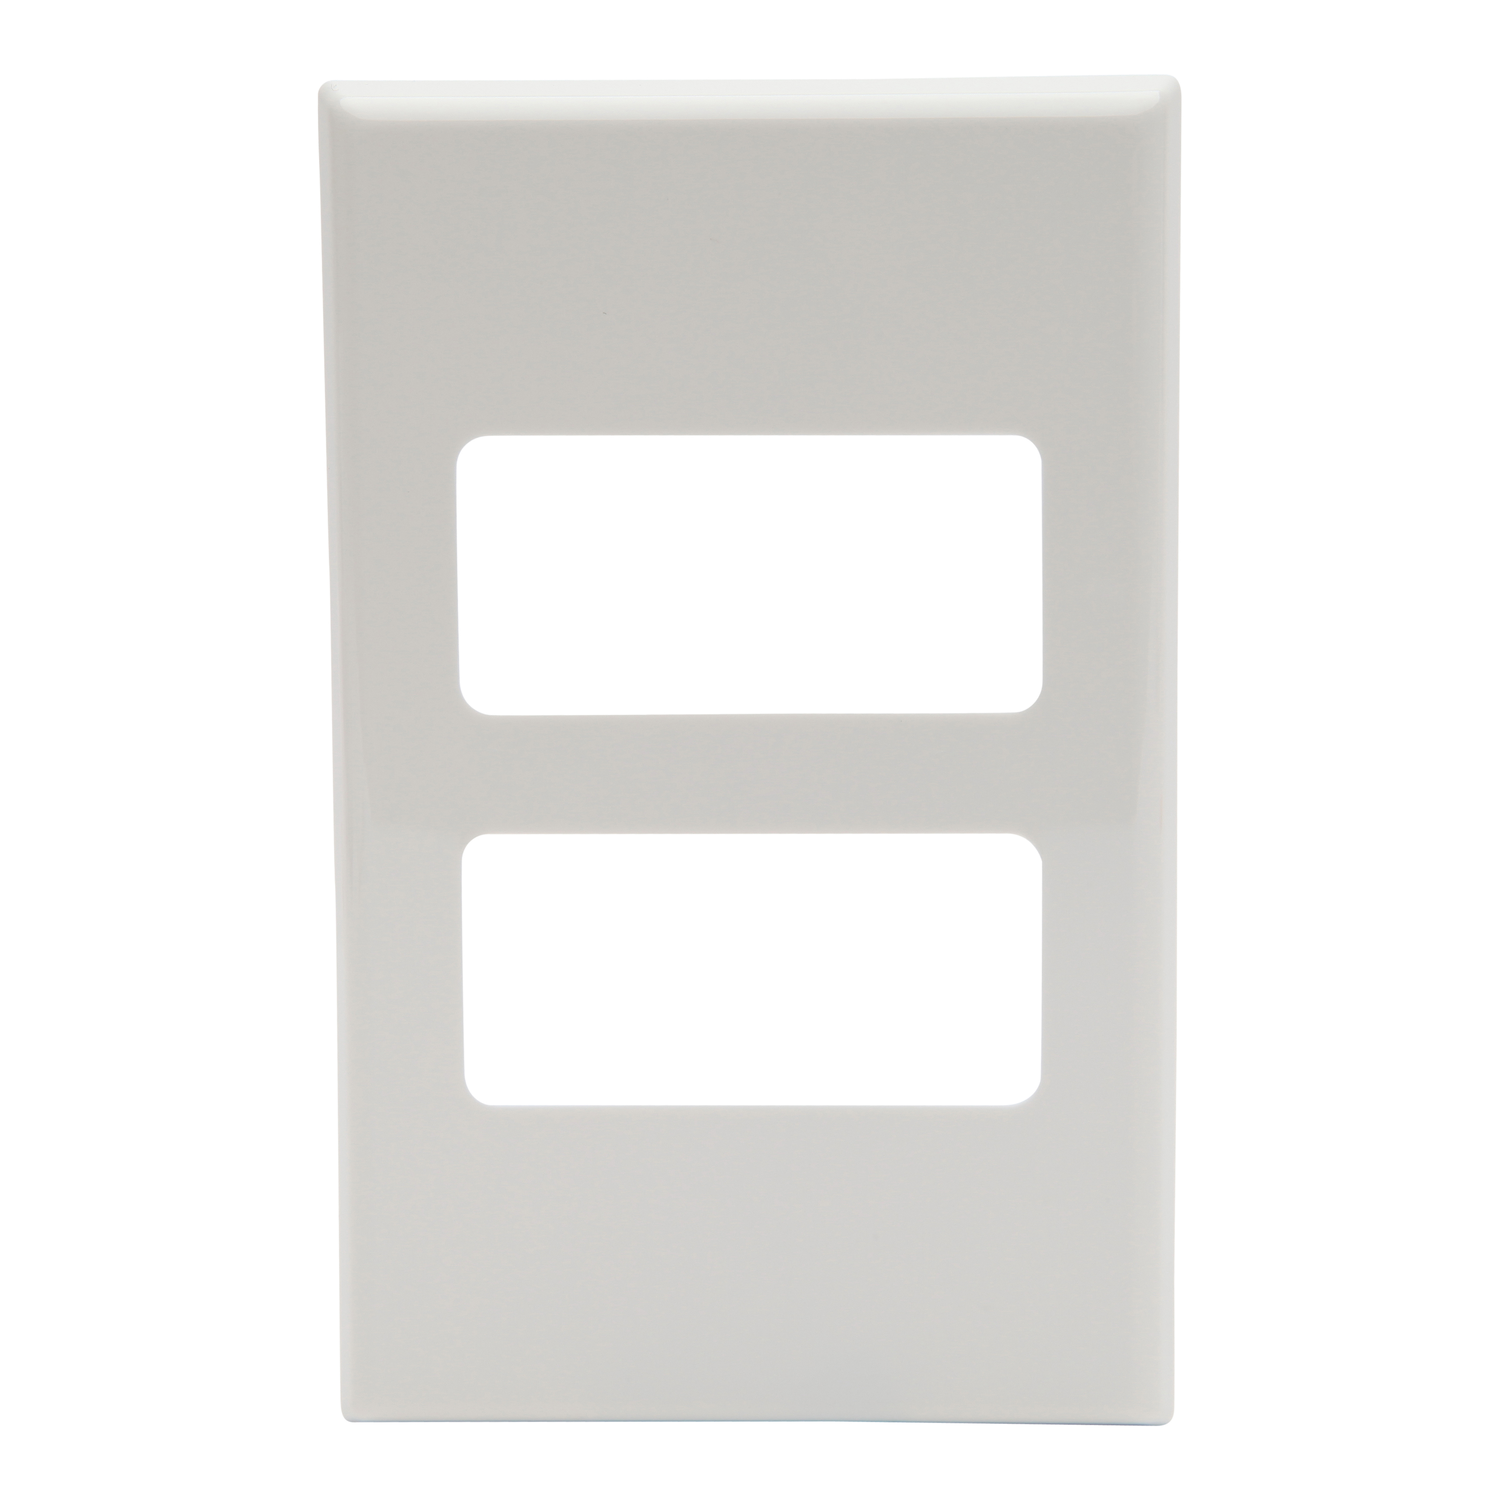 PDL 600 Series - Cover Plate Switch 4-Gang - White